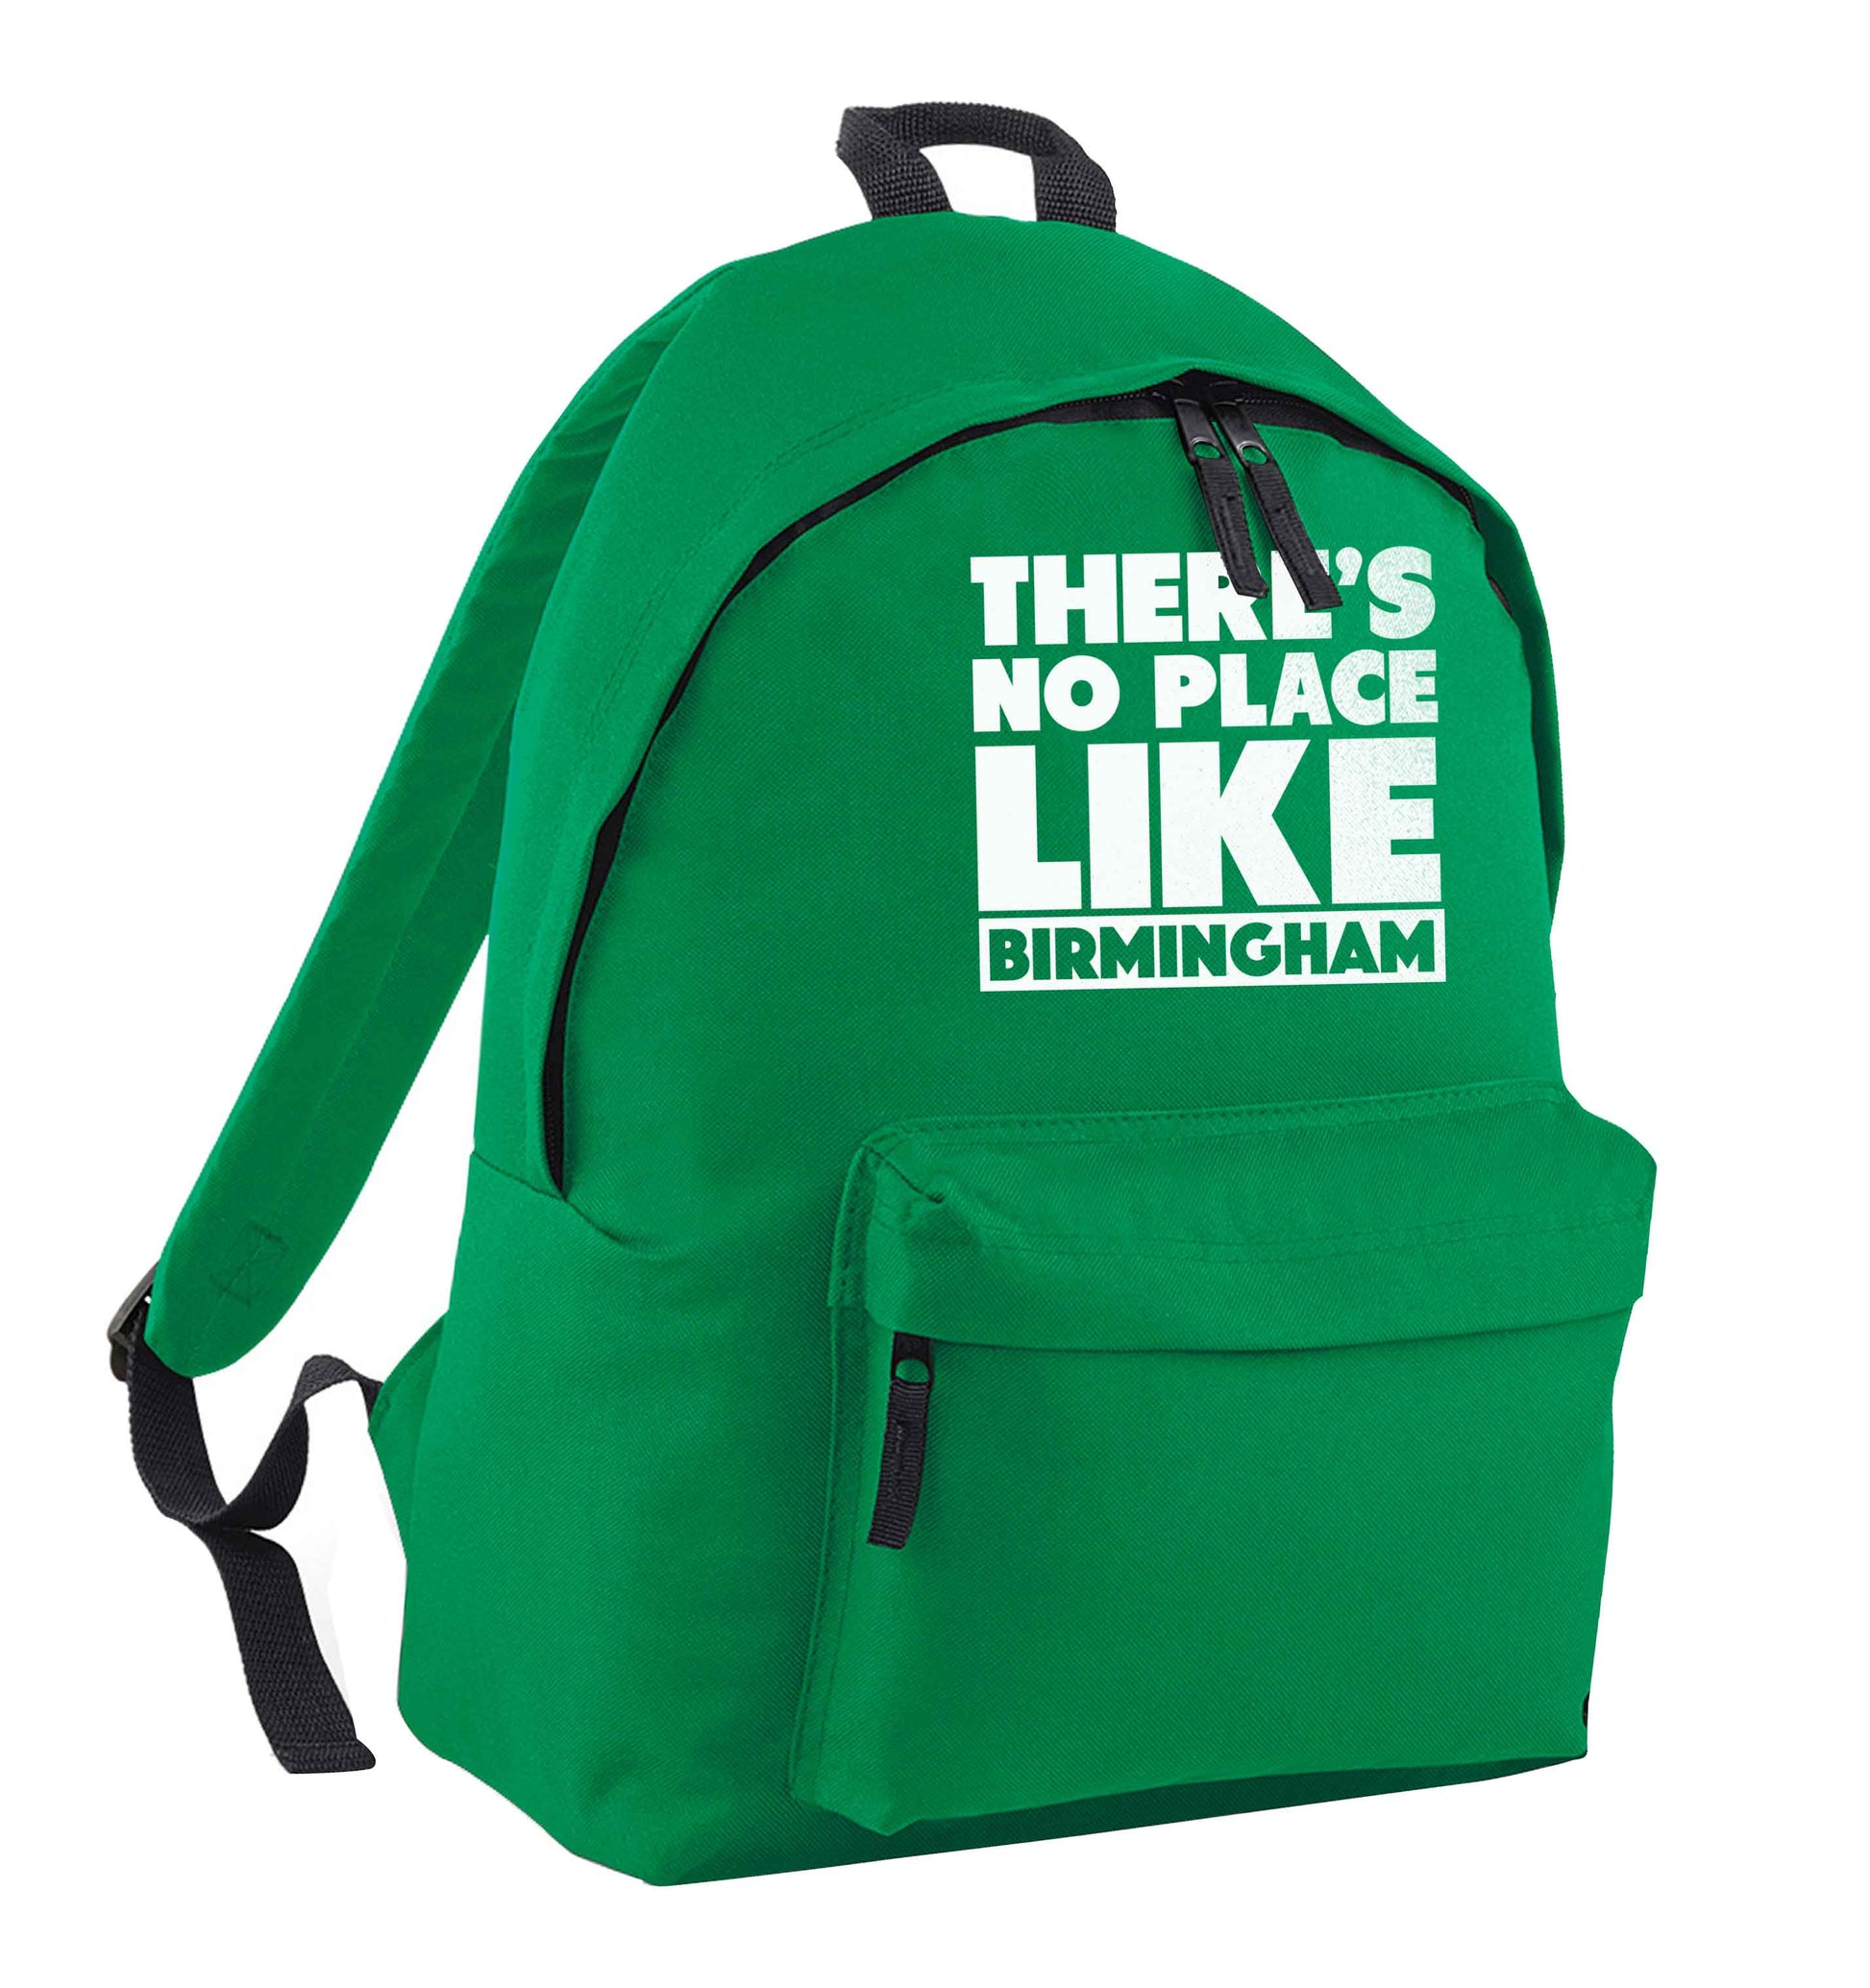 There's no place like Birmingham green adults backpack